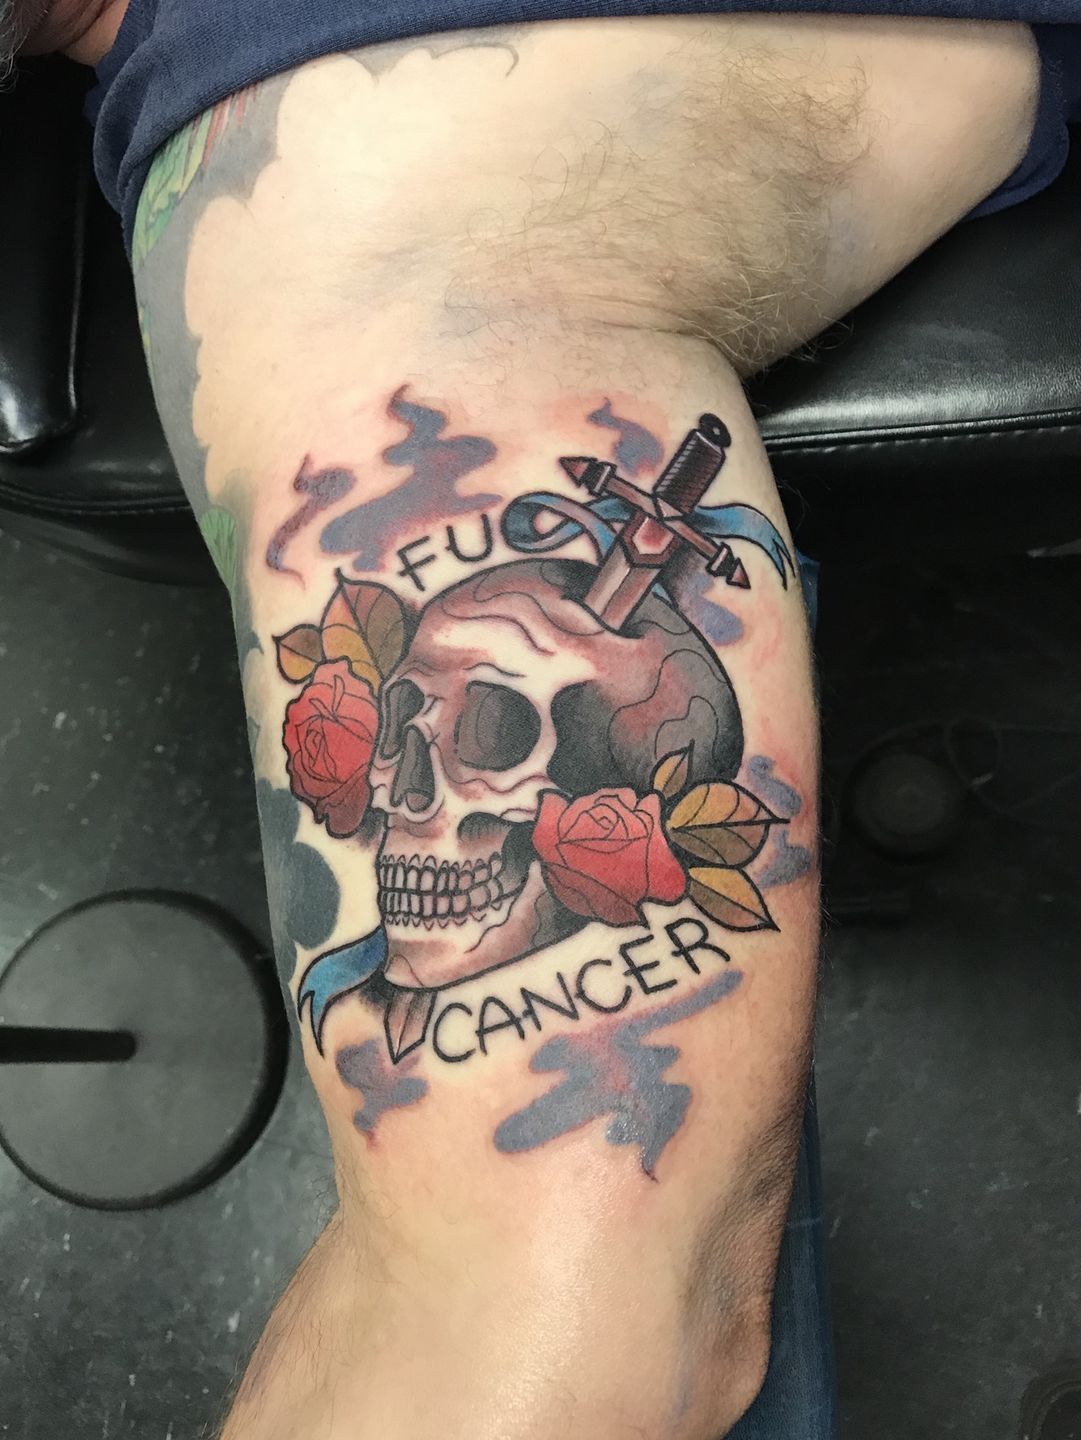 14 Powerful Tattoos Inspired By Cancer